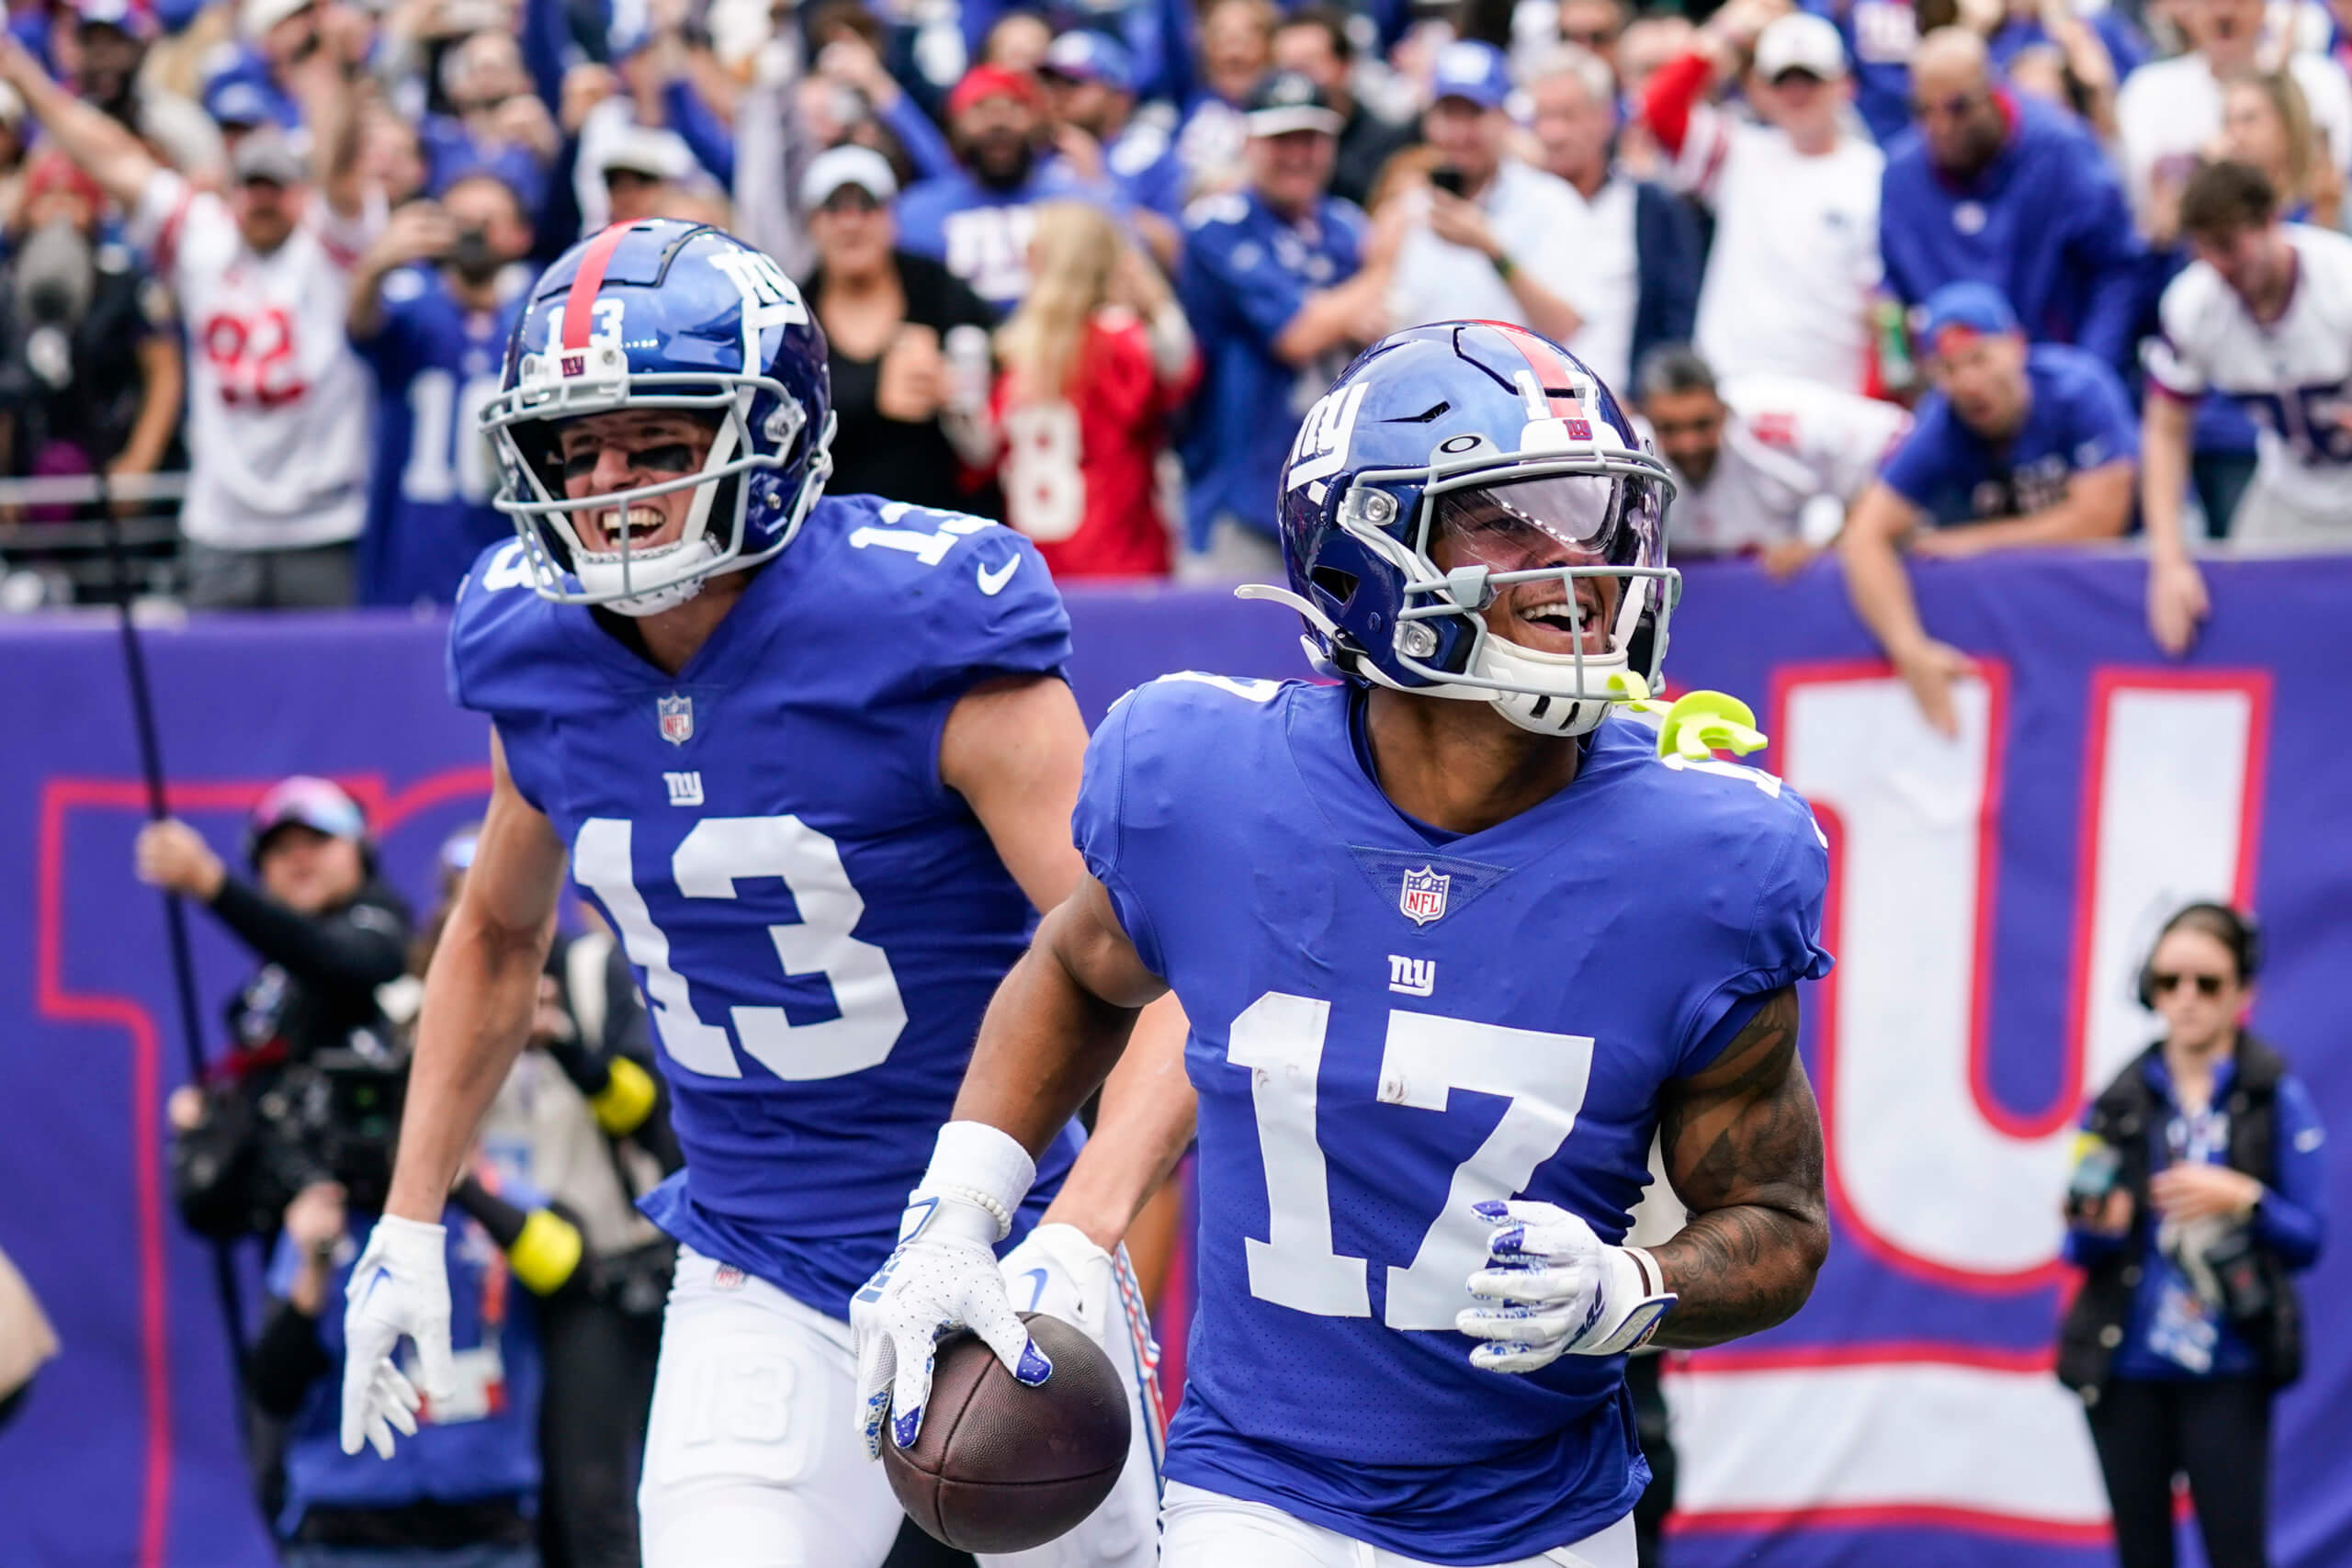 NFL power rankings, Week 4: New York Giants tumble after loss